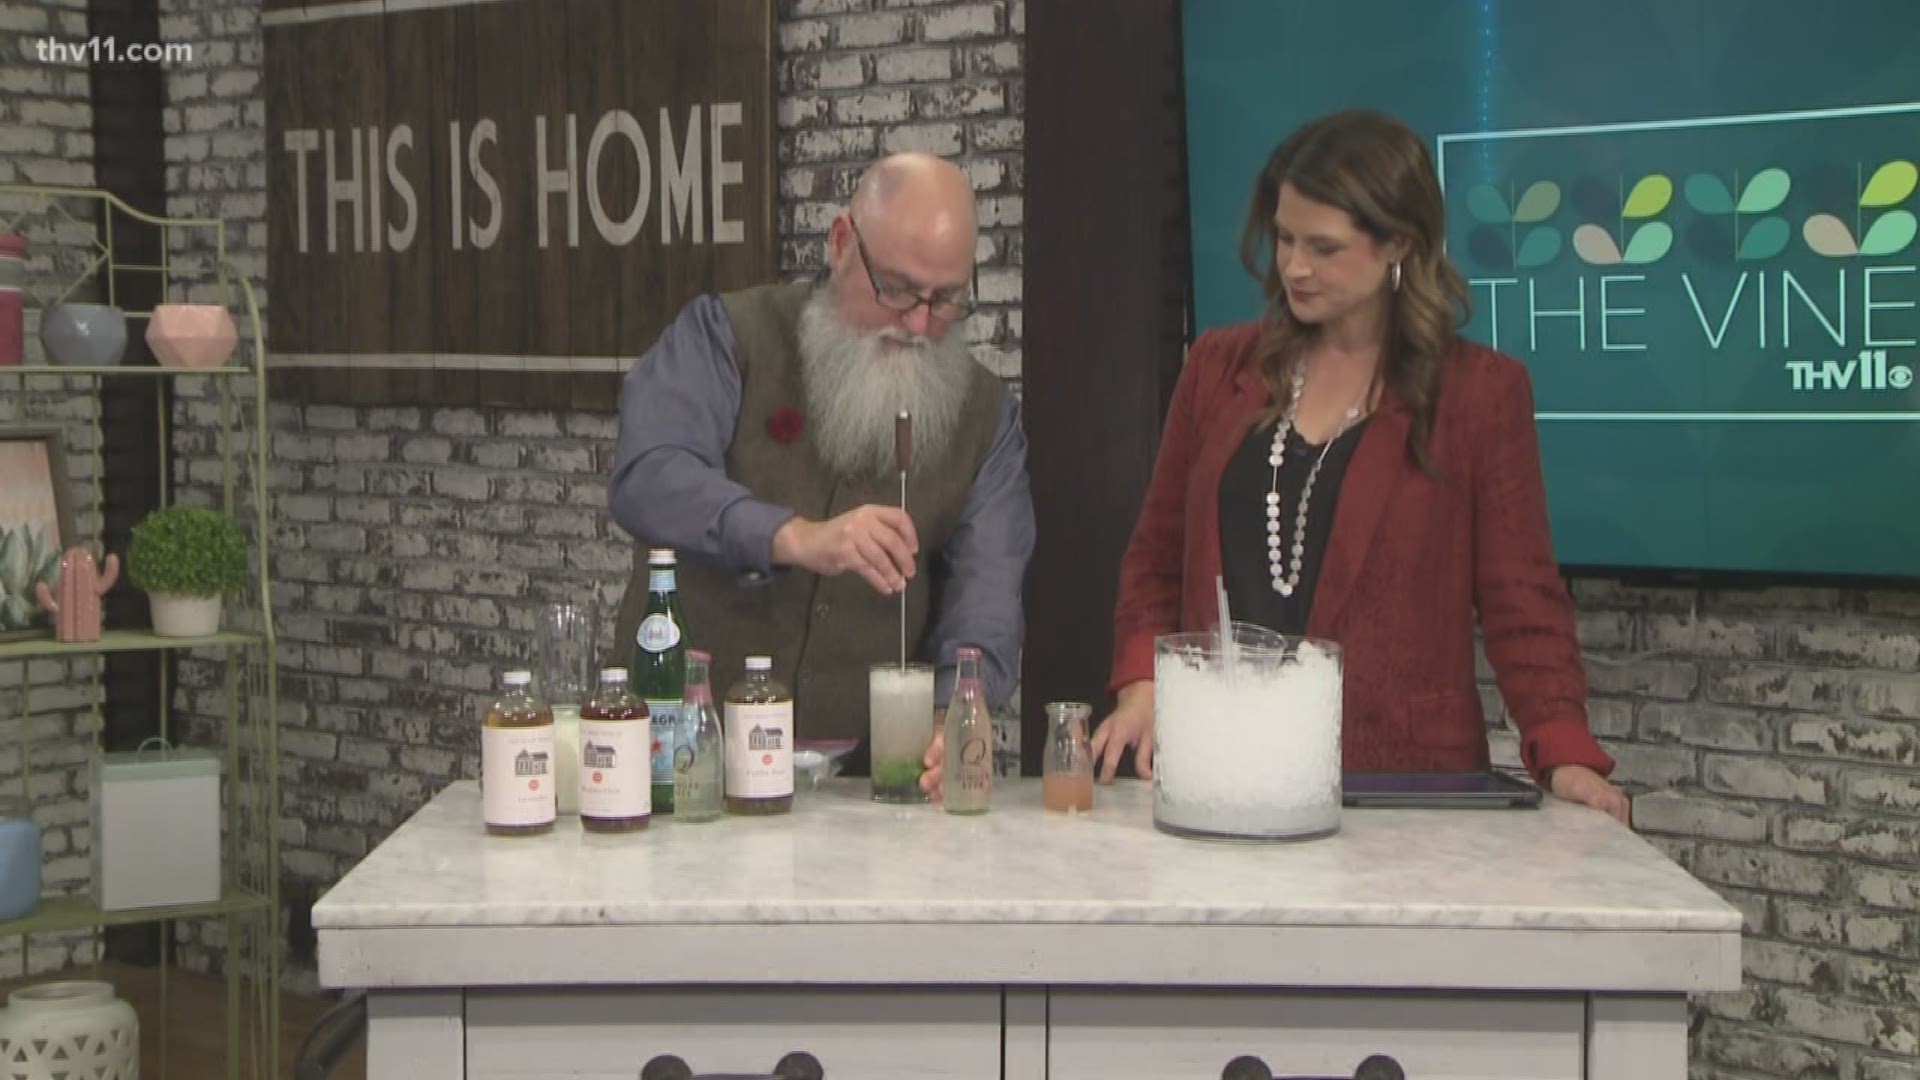 Mixologist Mark Hooper with The Pizzeria in the Heights showed us some popular mocktails for Dry January. It's the month that people ditch alcohol after the busy holiday party season.